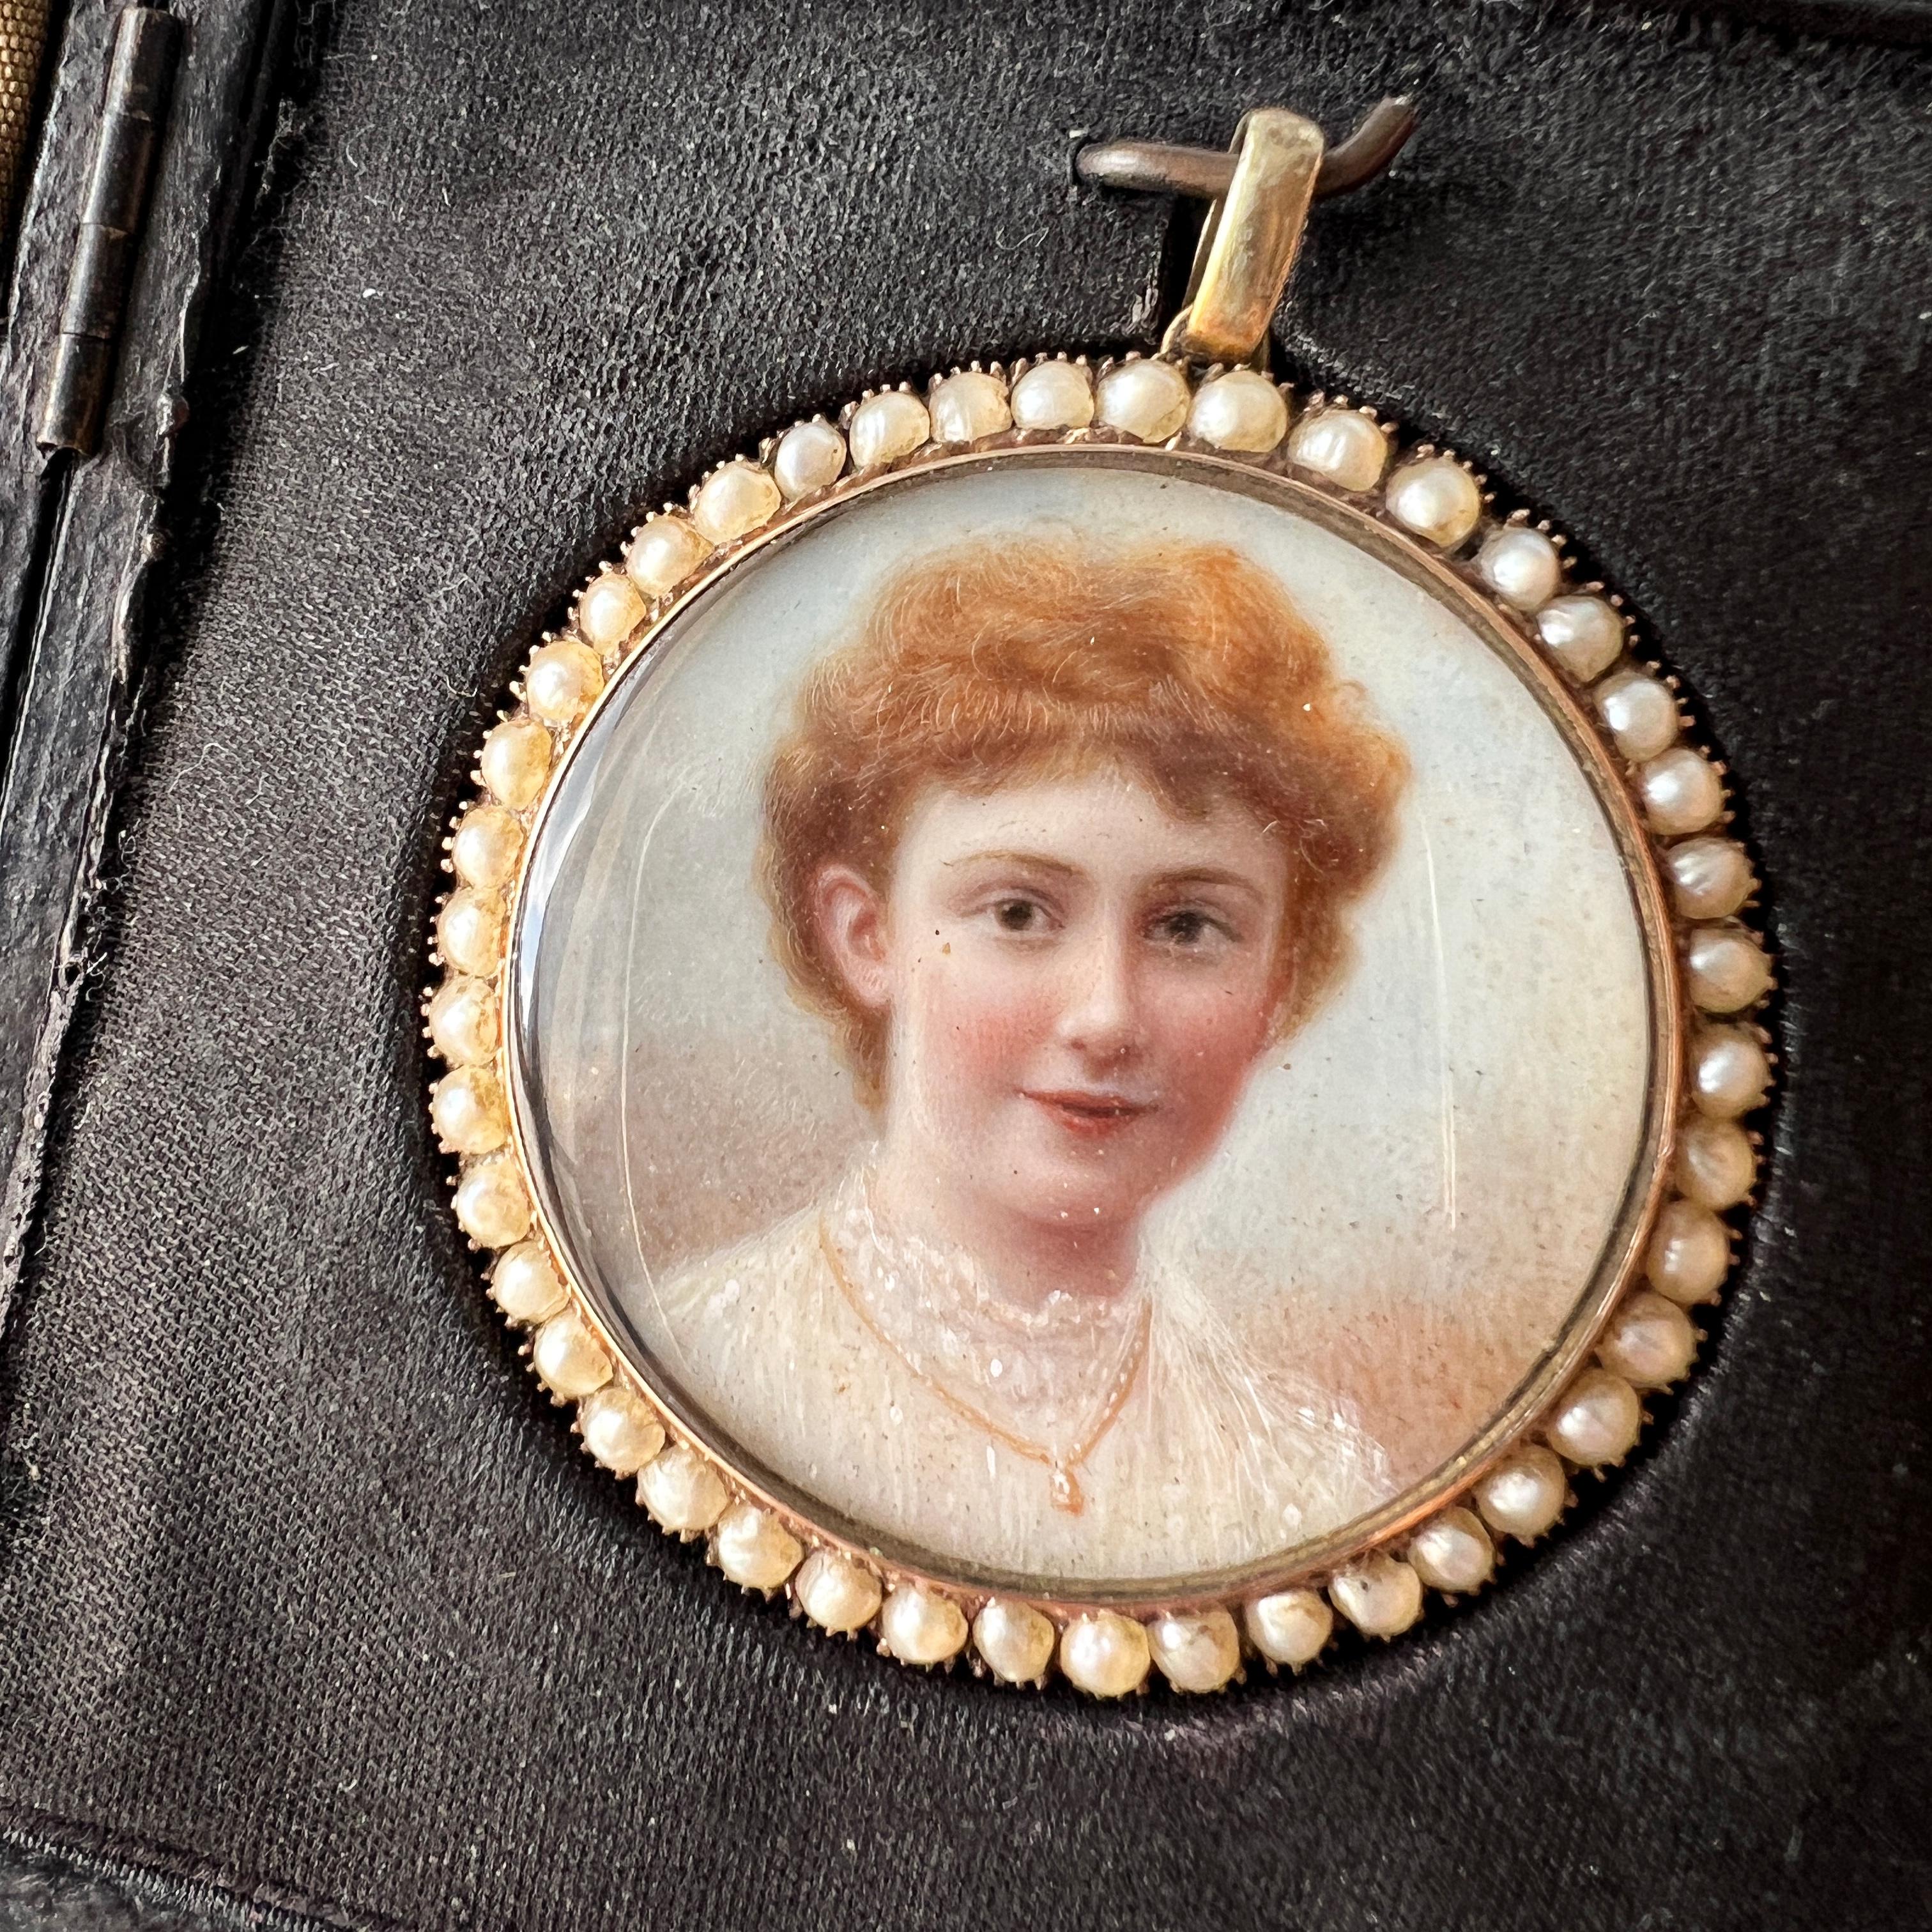 For sale a rare piece of miniature portrait pendant, featuring a lovely young lady in a white lace dress. The pendant is made during the 19th century, the Victorian era and it is very probably an English work.

The miniature has a large size of 37mm